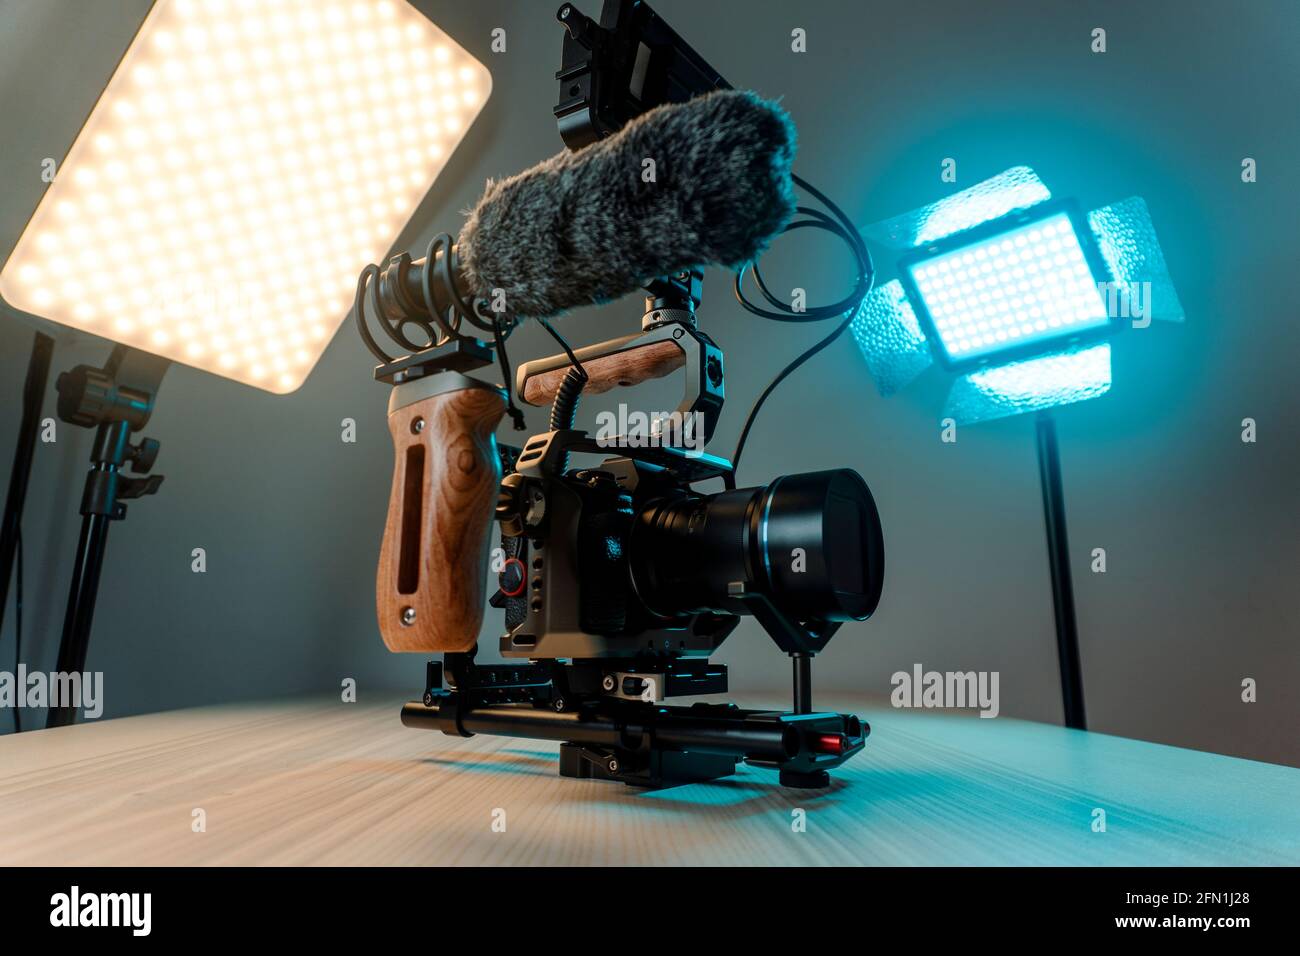 Full frame camera with external monitor, mic, and handheld film-making rig. Stock Photo